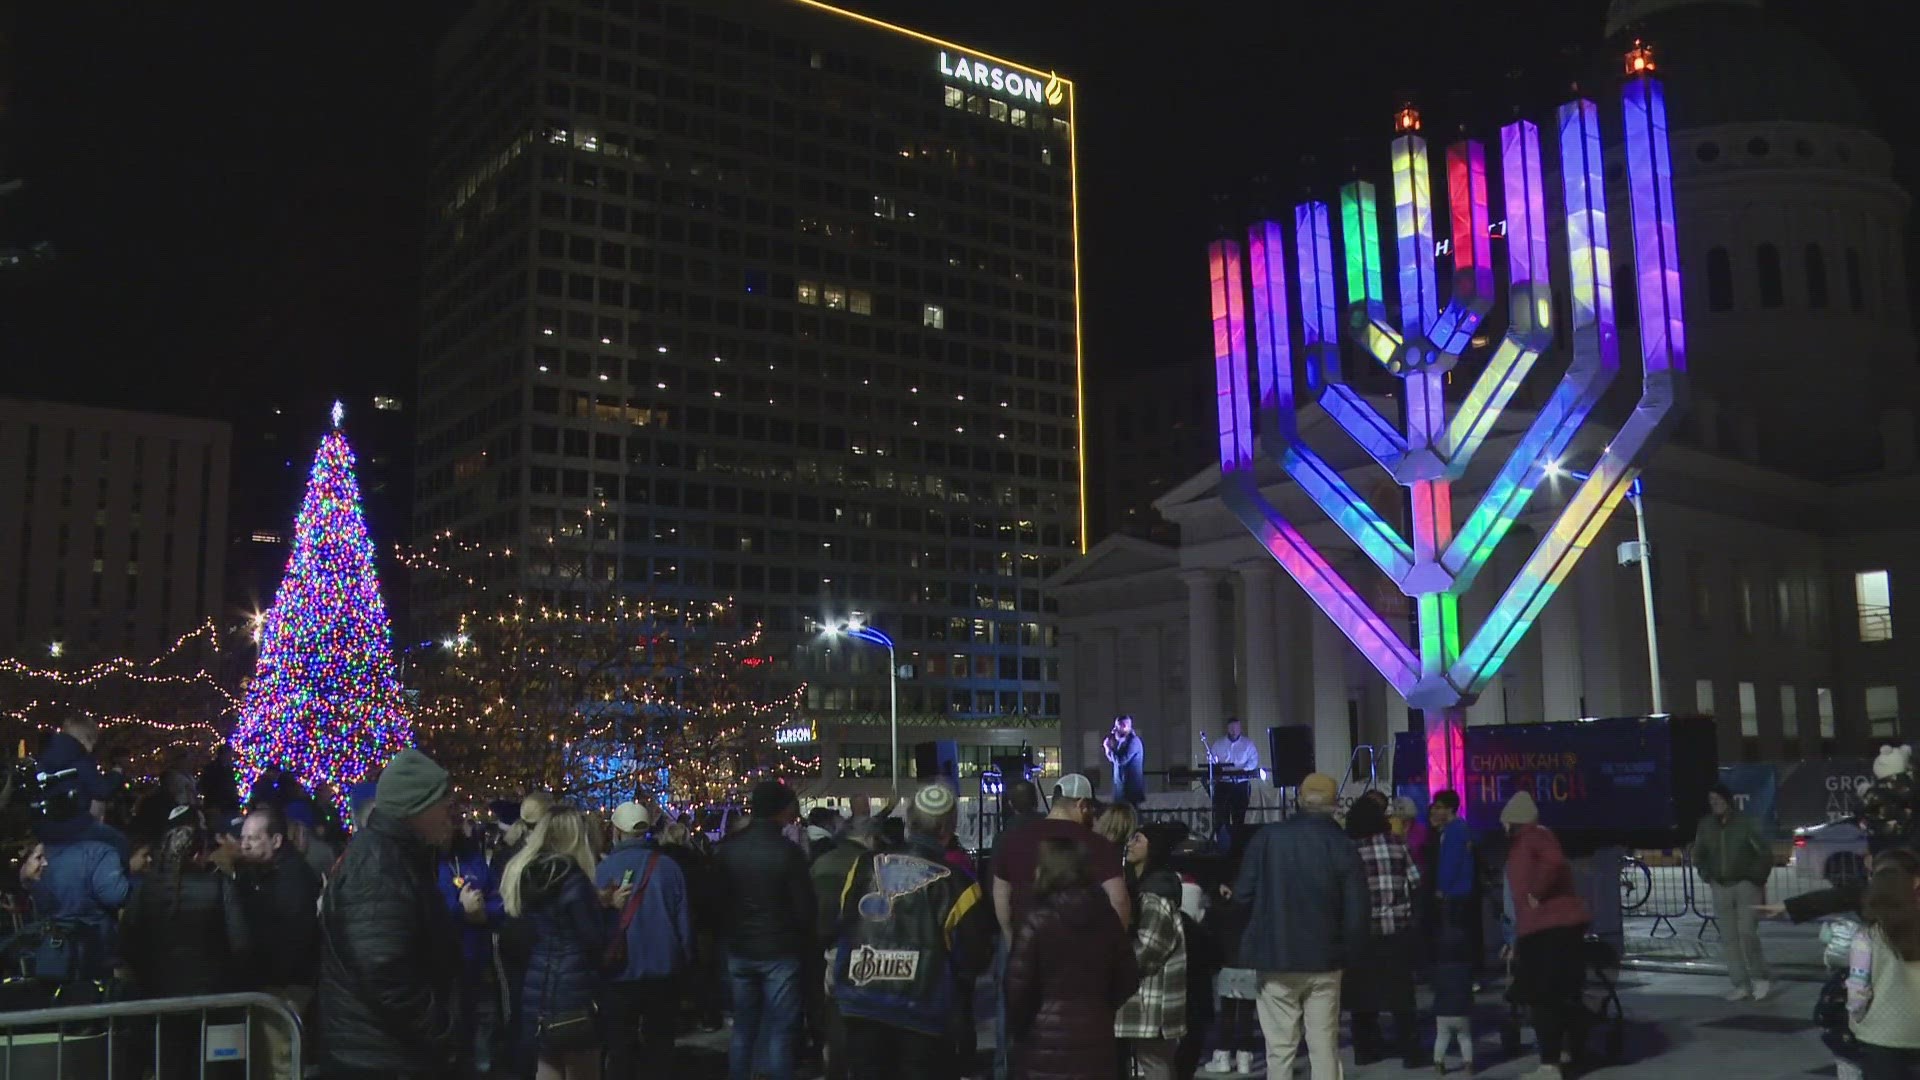 Thursday, Dec. 7, marked the first night of Hanukkah. The night was kicked off with The Festival of Lights.